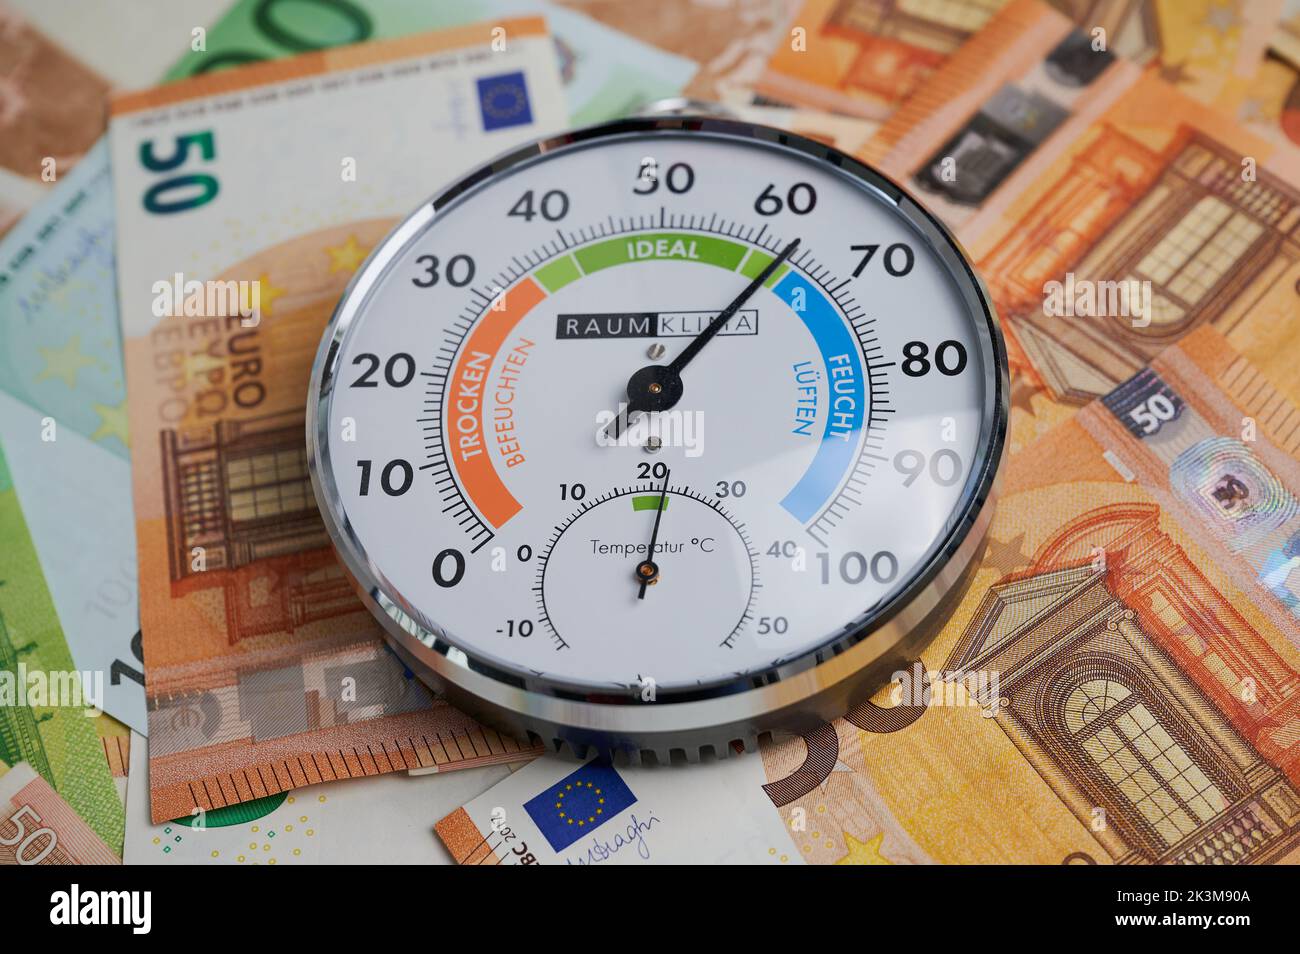 hygrometer with German text on Euro banknotes Stock Photo